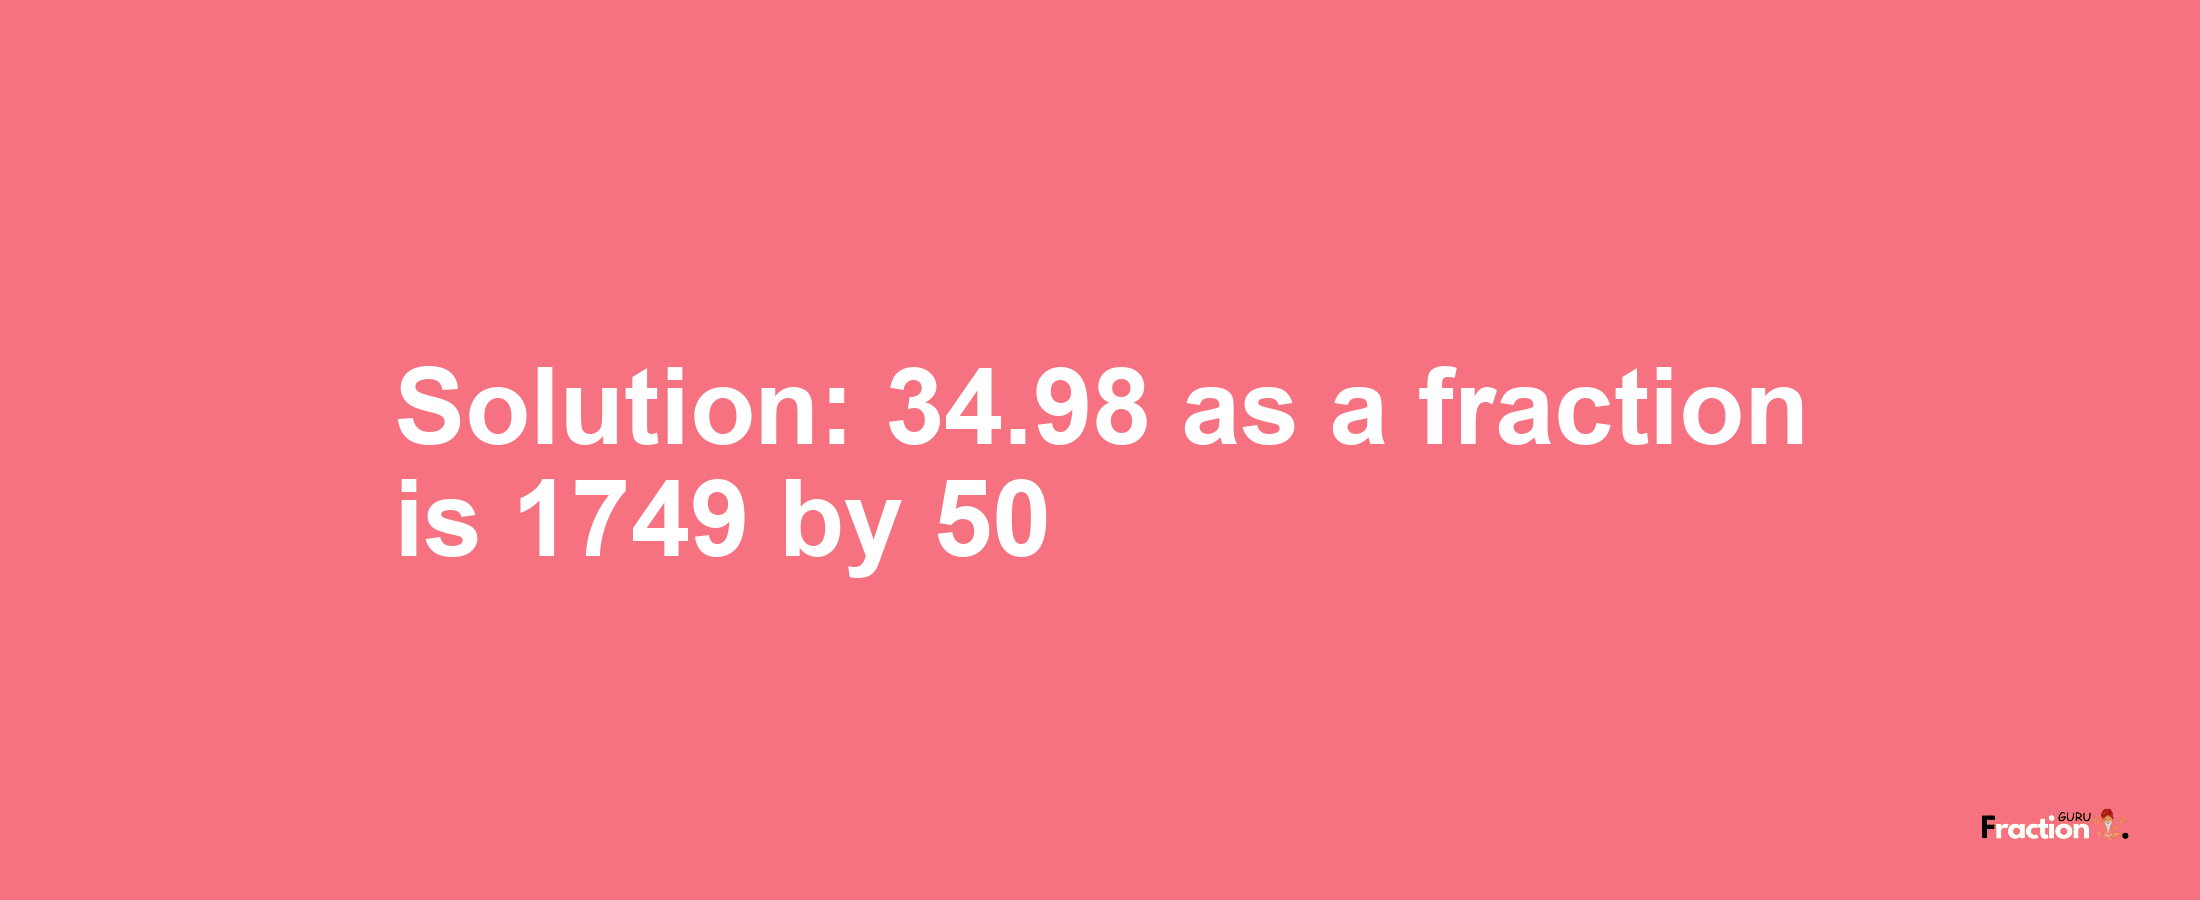 Solution:34.98 as a fraction is 1749/50